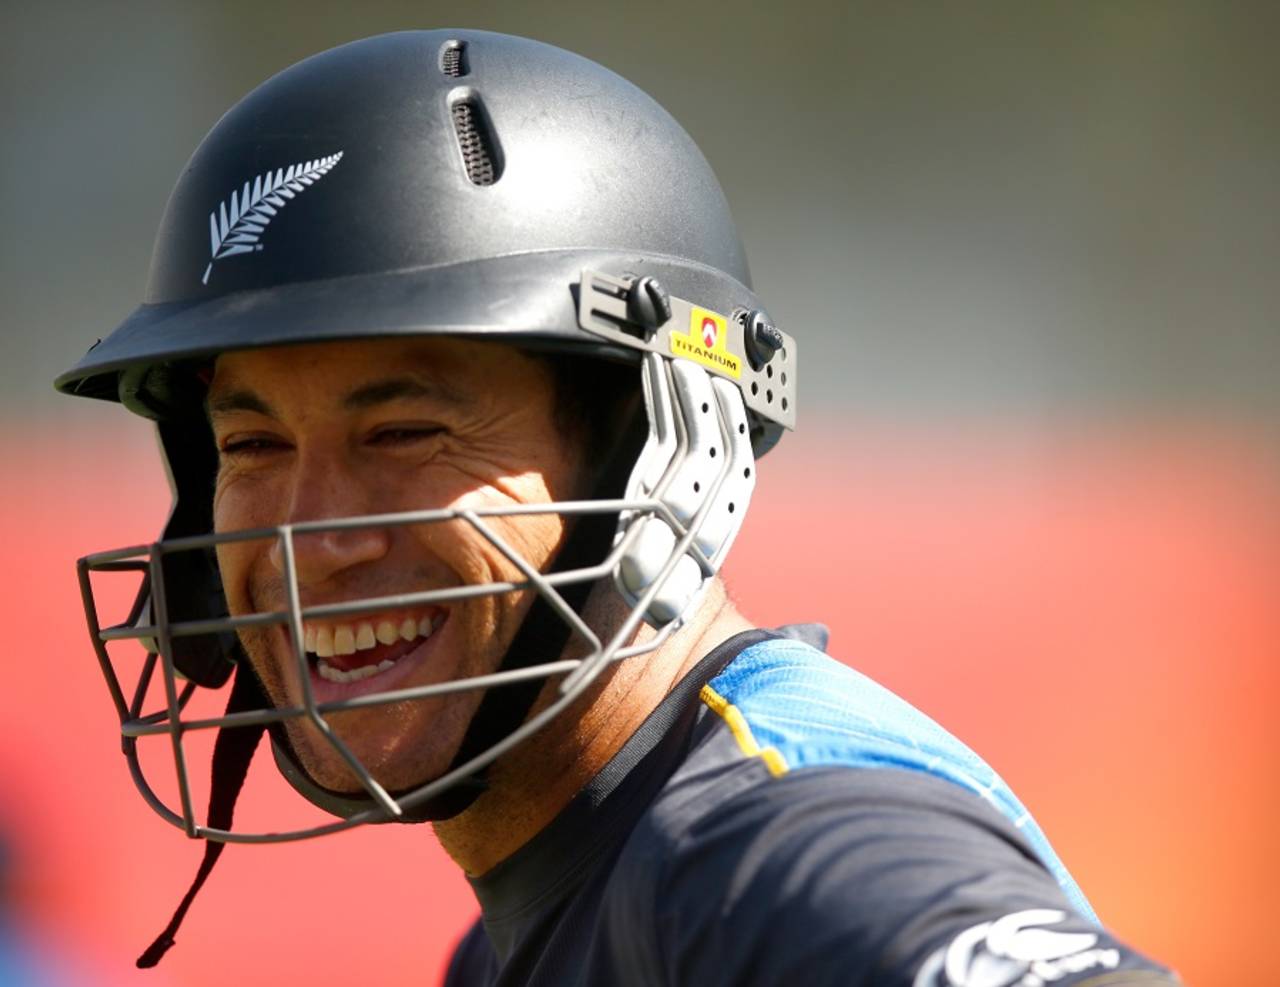 Ross Taylor also captained New Zealand for a brief period&nbsp;&nbsp;&bull;&nbsp;&nbsp;Getty Images